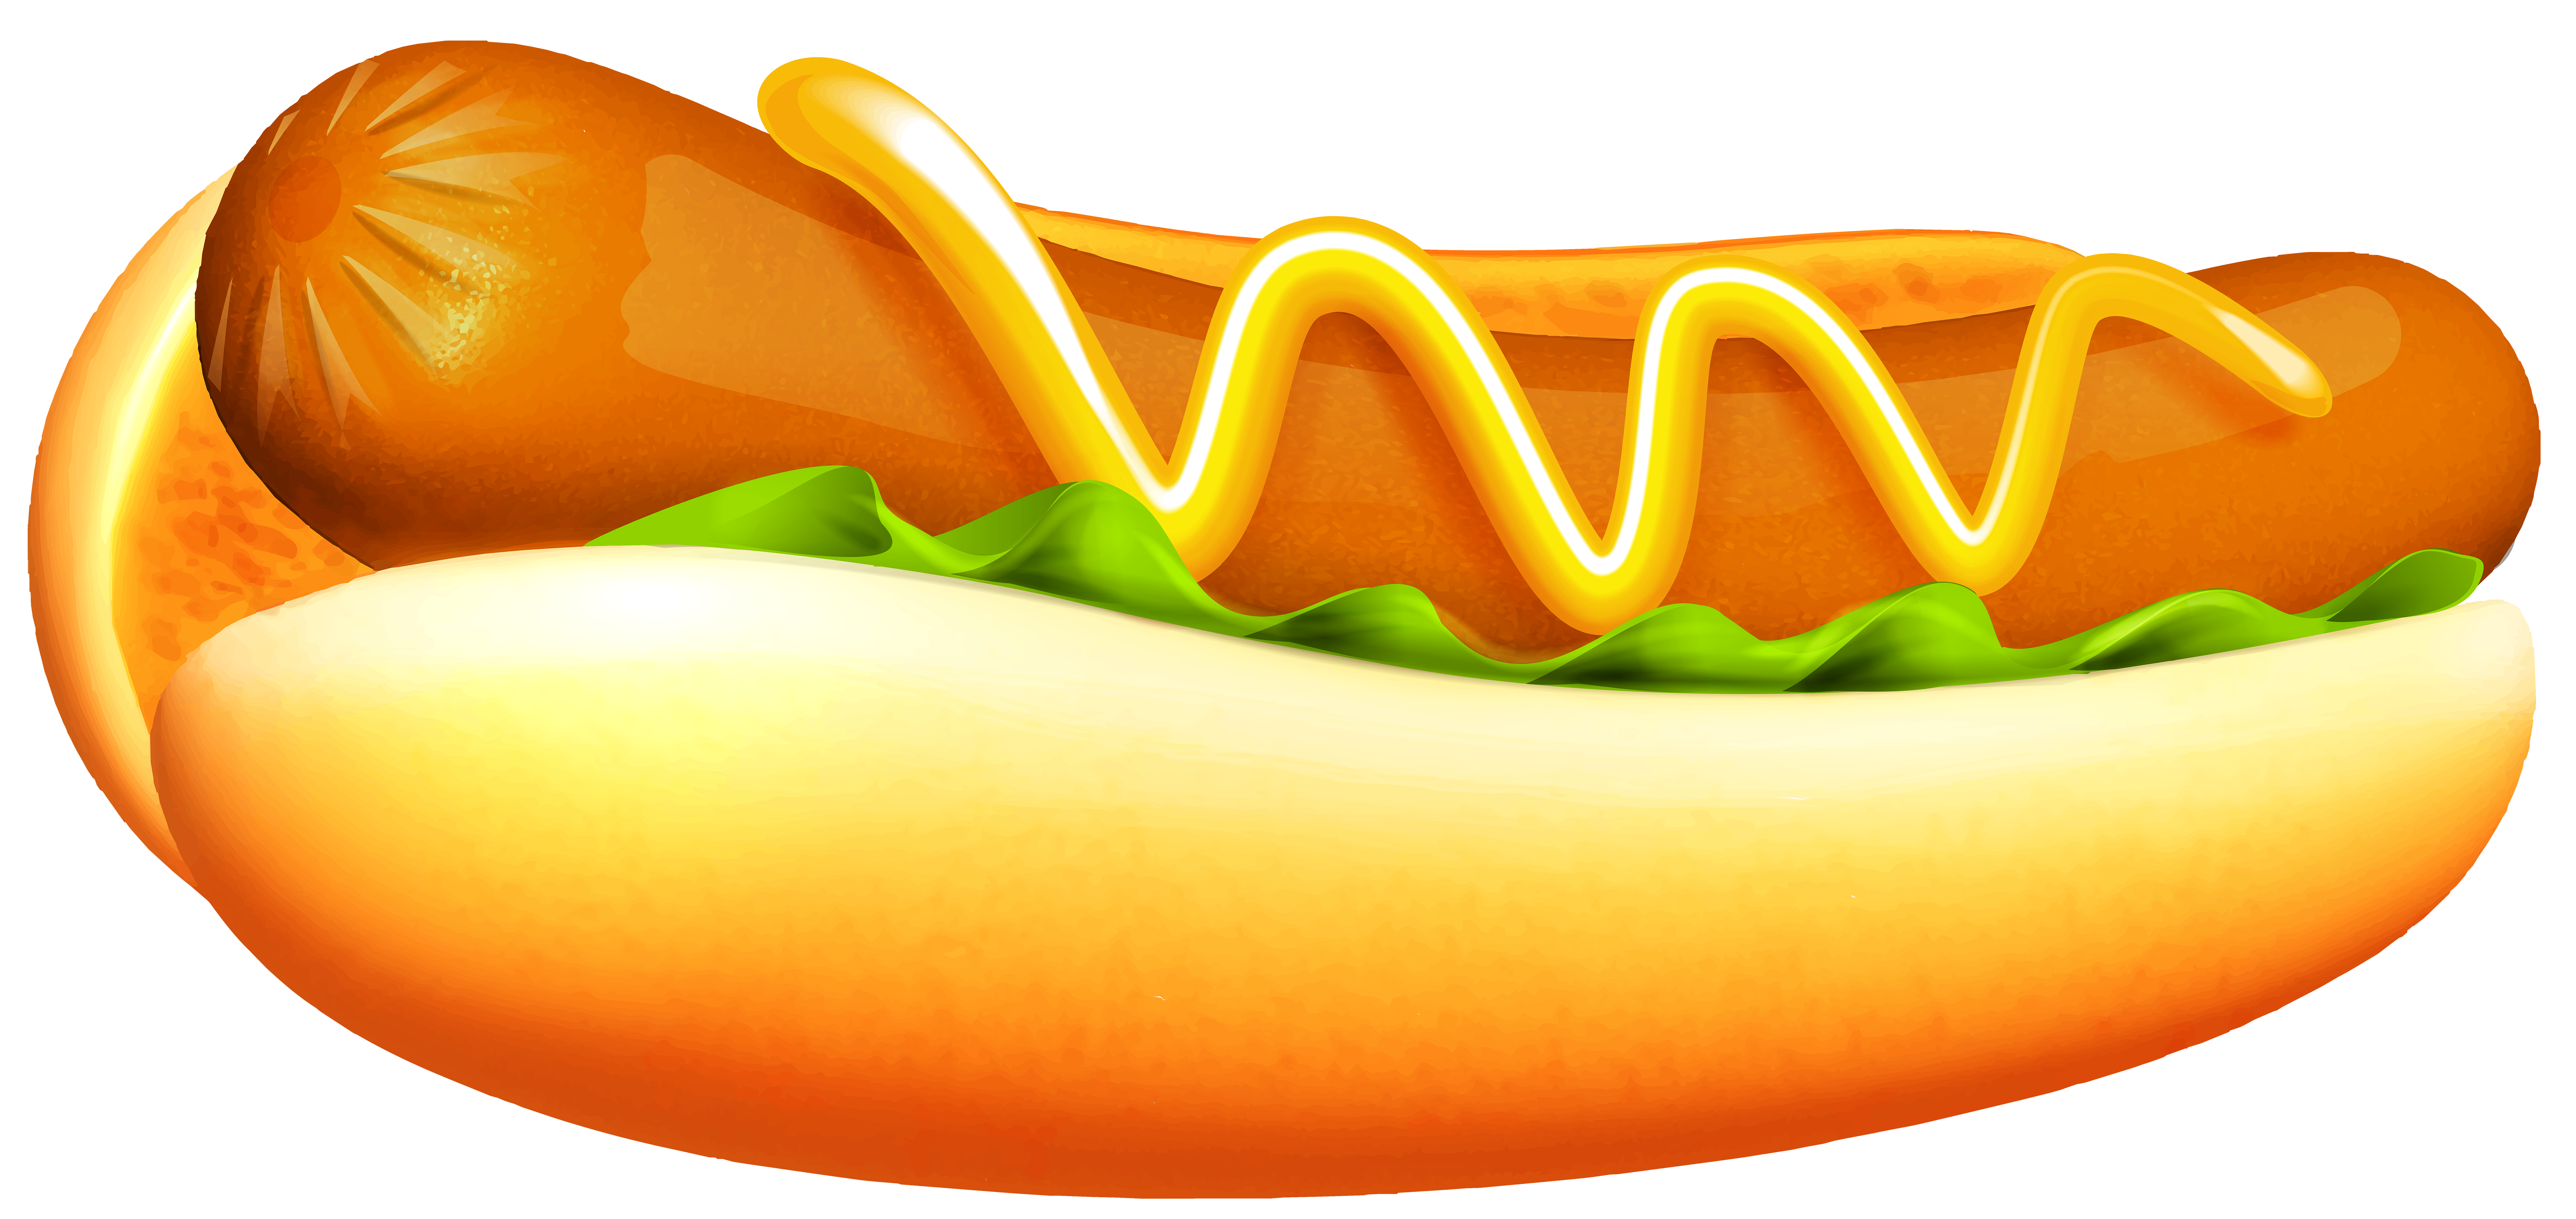 Hot Dog Transparent Png Clipart Image Gallery Yopriceville Images, Photos, Reviews